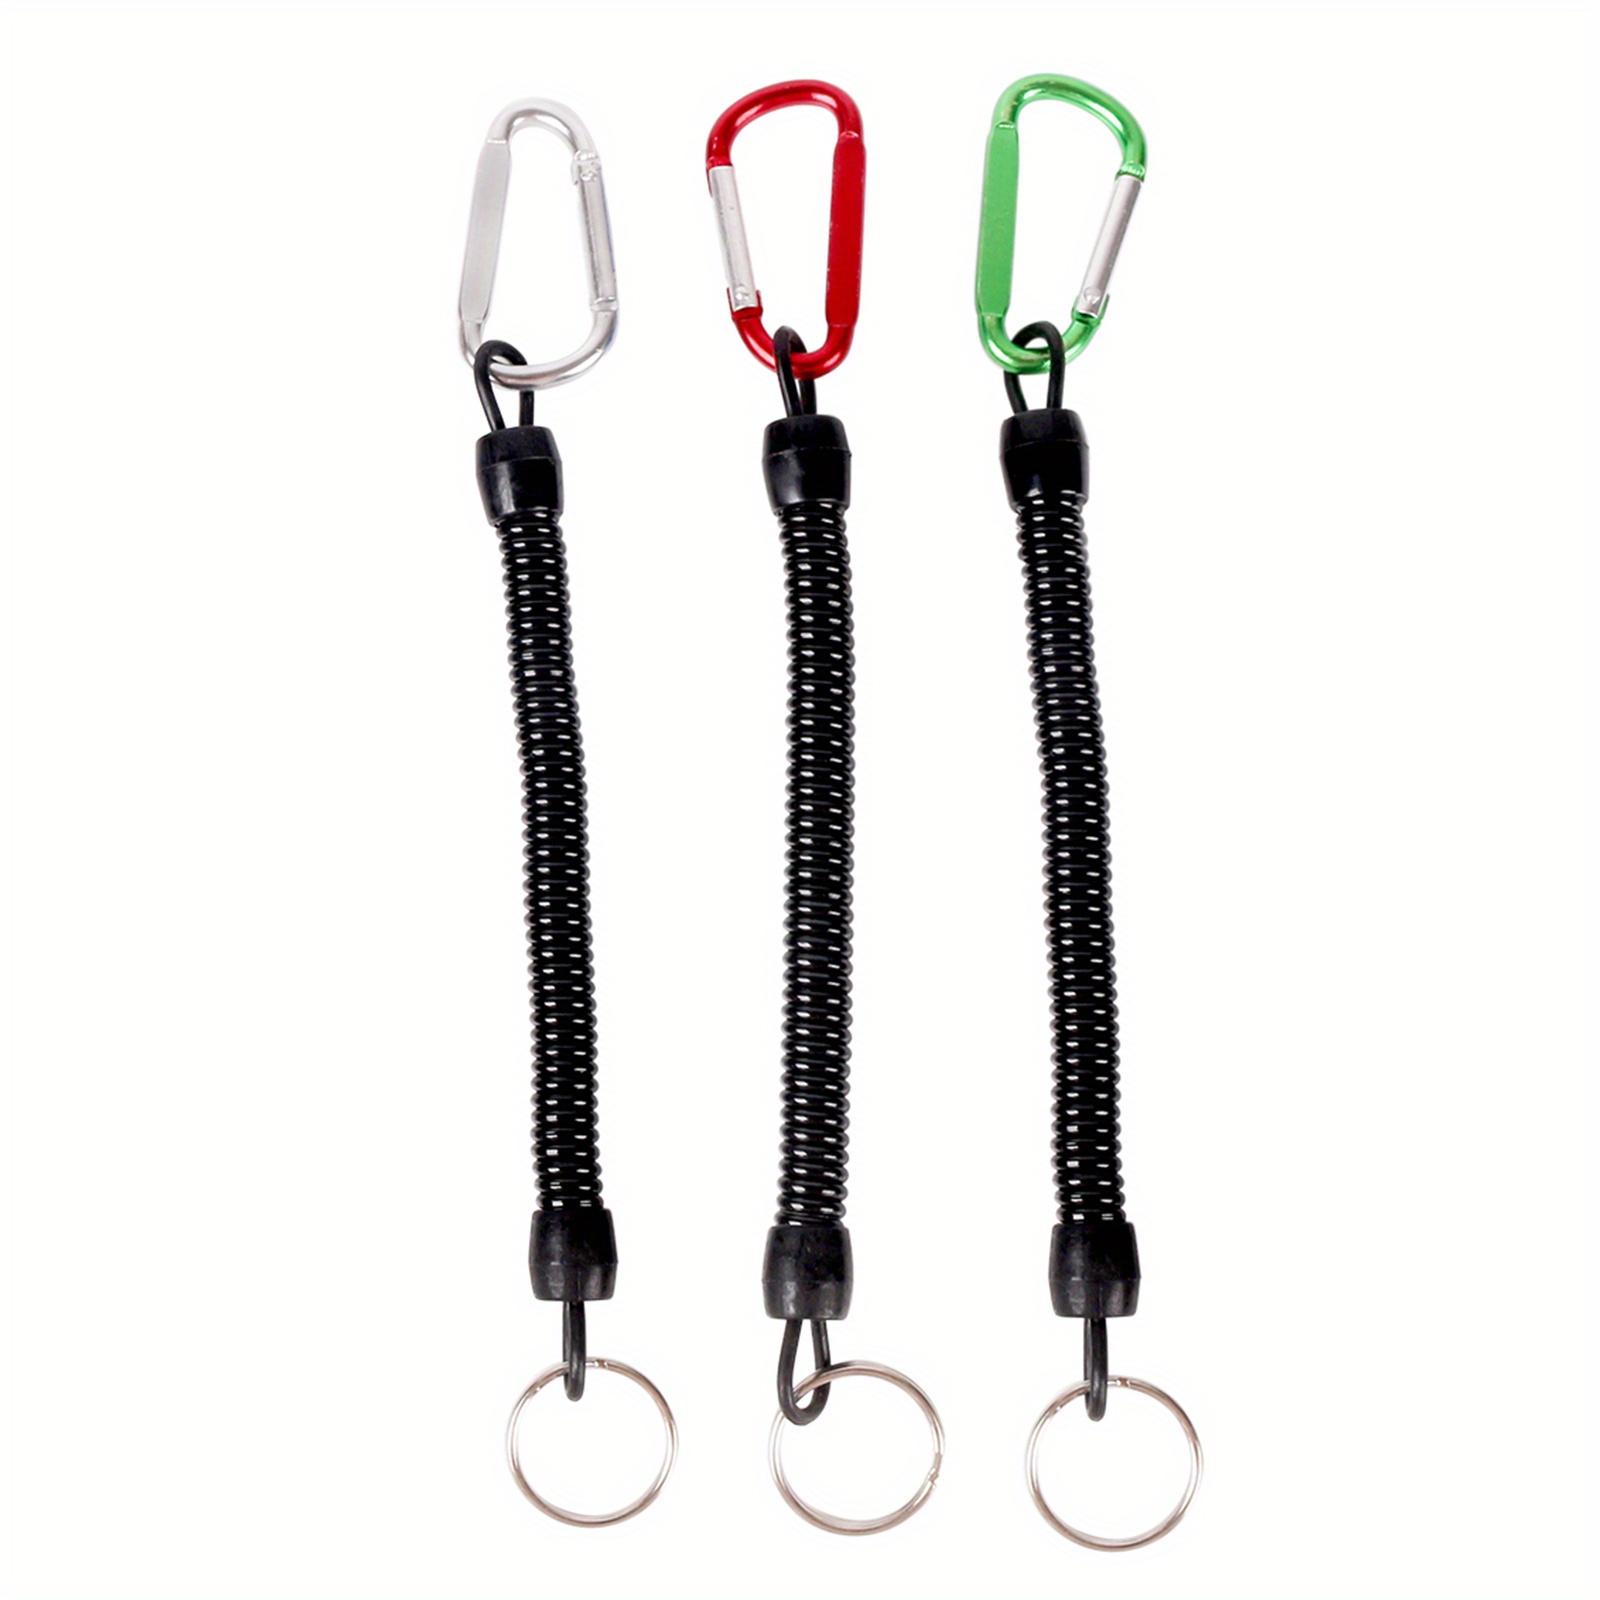 Generic Retractable Fishing Coiled Lanyard Rod Leash Extension